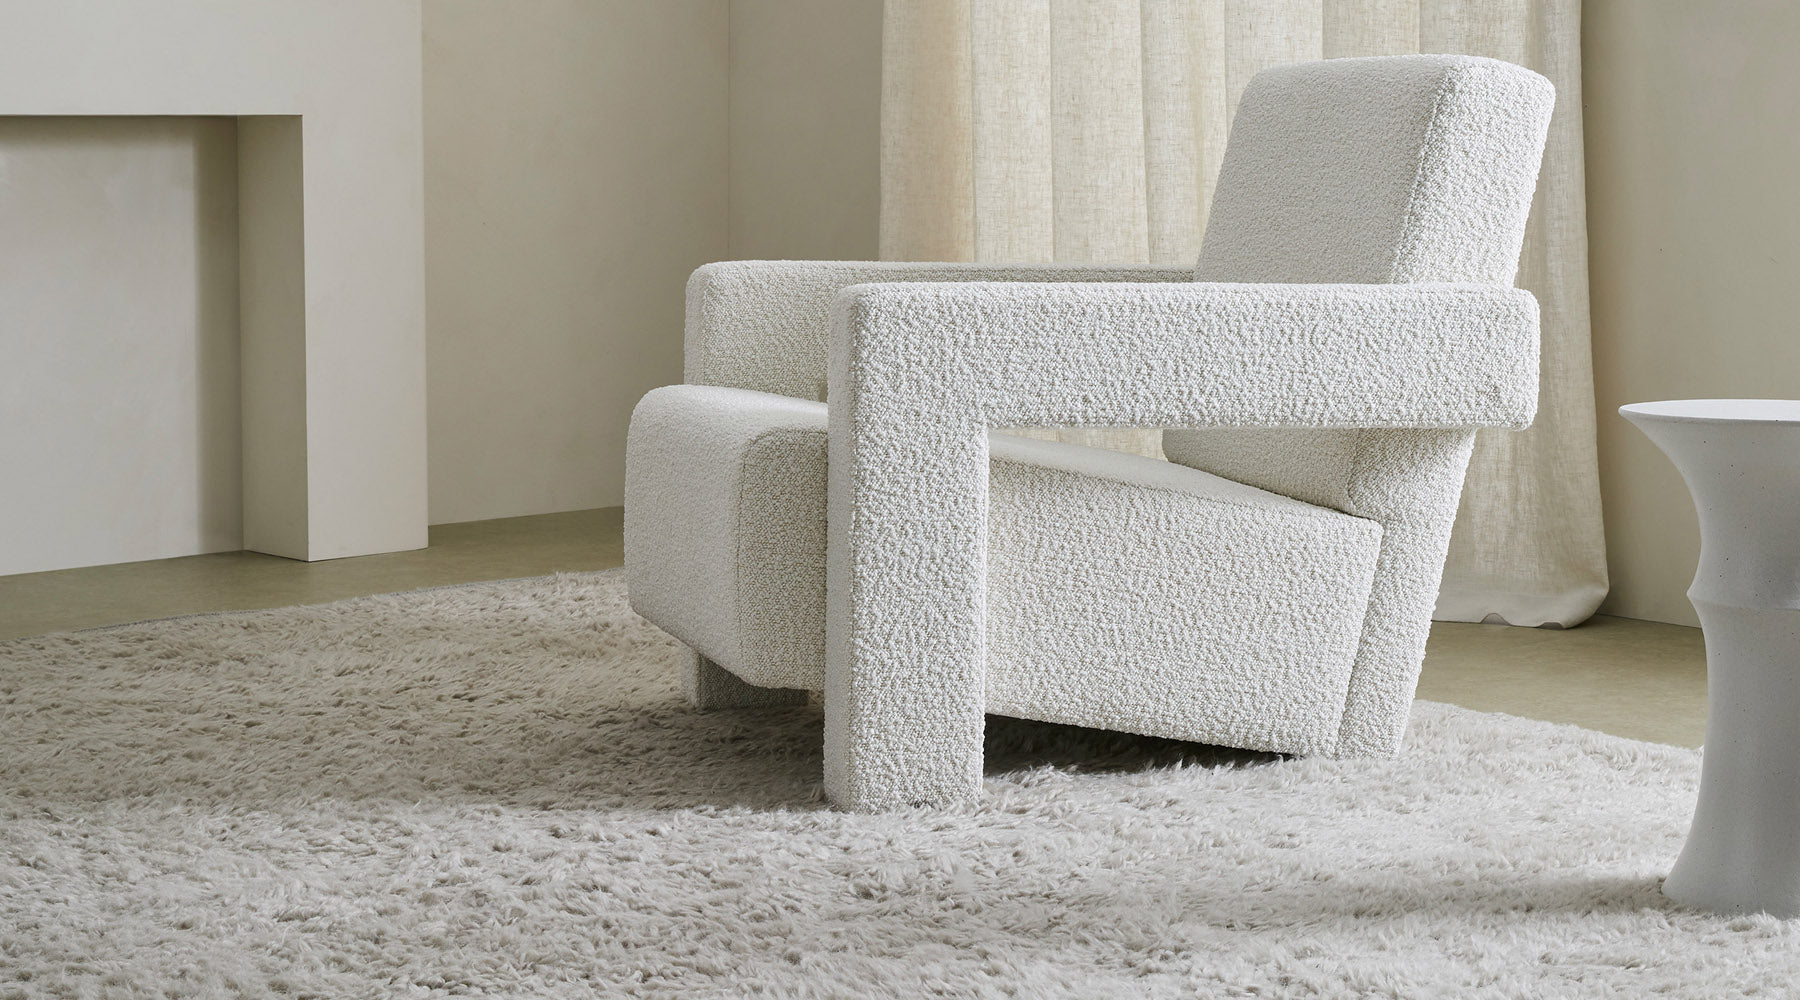 Boucle chair with Weave Greenwich Feather shag pile rug